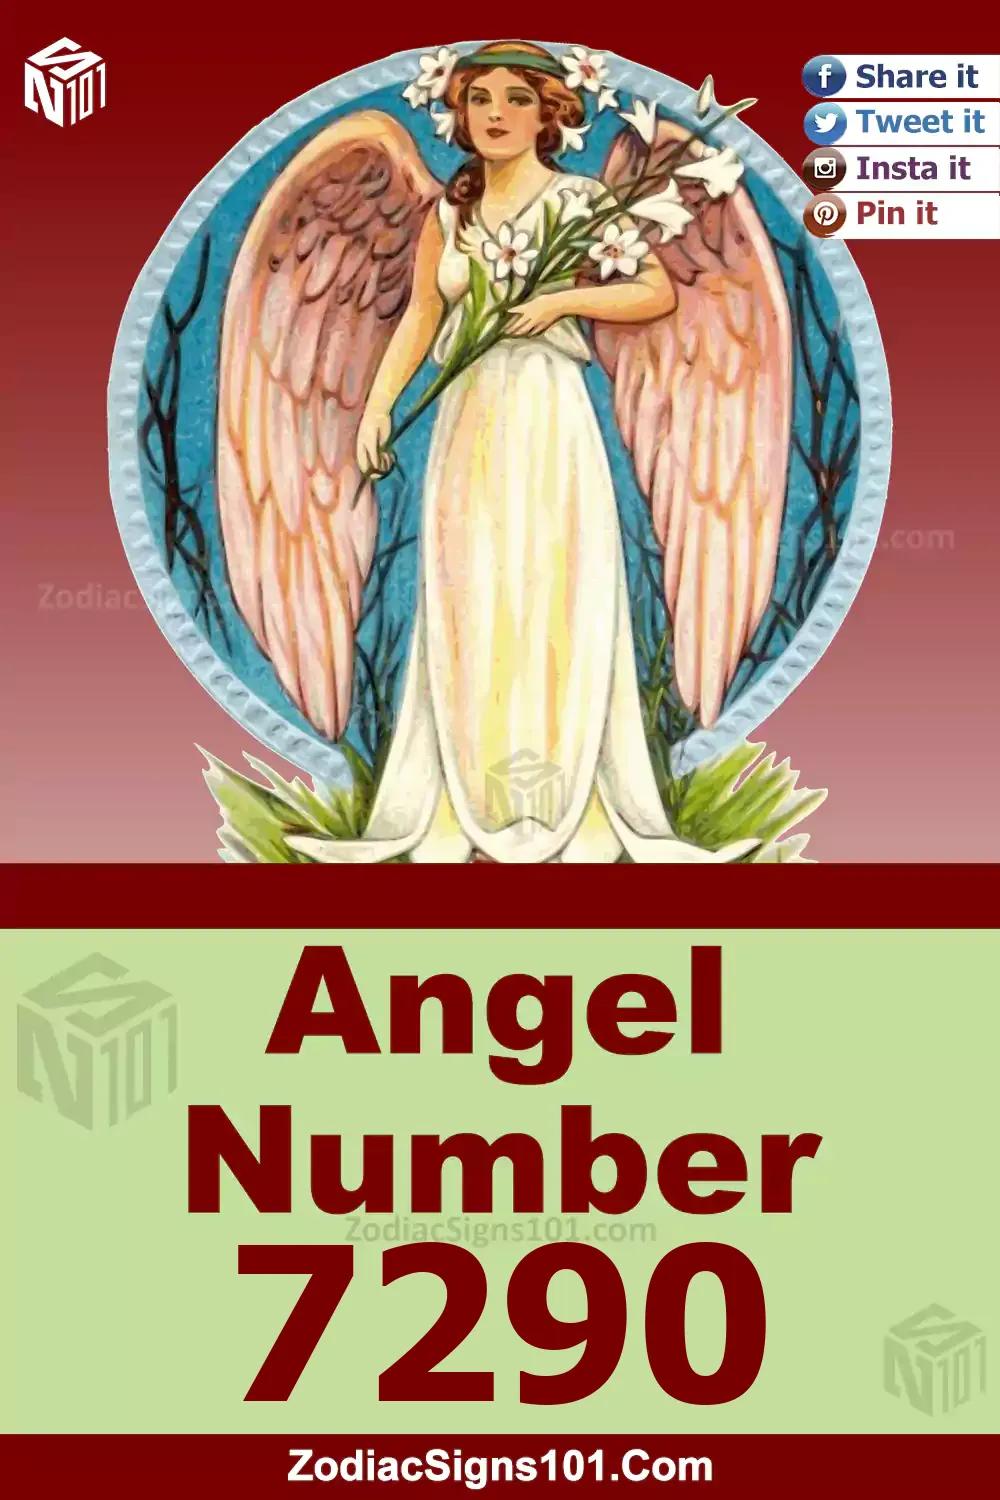 7290 Angel Number Meaning